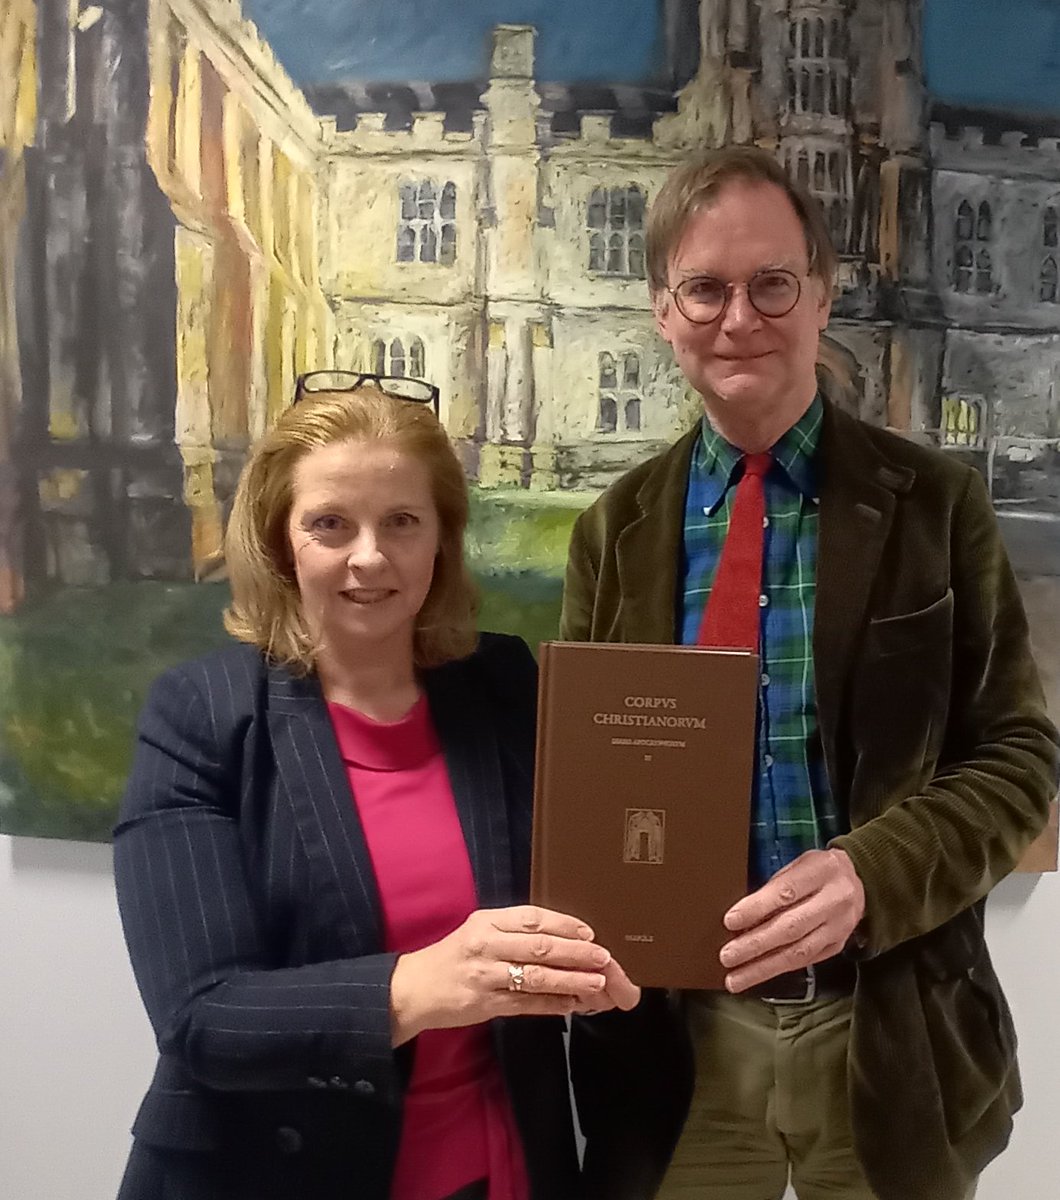 Apocrypha Hiberniae II: Apocalyptica 3 has arrived! Inside are many superb contributions. Of special pride to the Department is Dr Caitríona Ó Dochartaigh's edition and commentary on poems 153-162 of Saltair na Rann. Thanks to @Brepols for all their help!